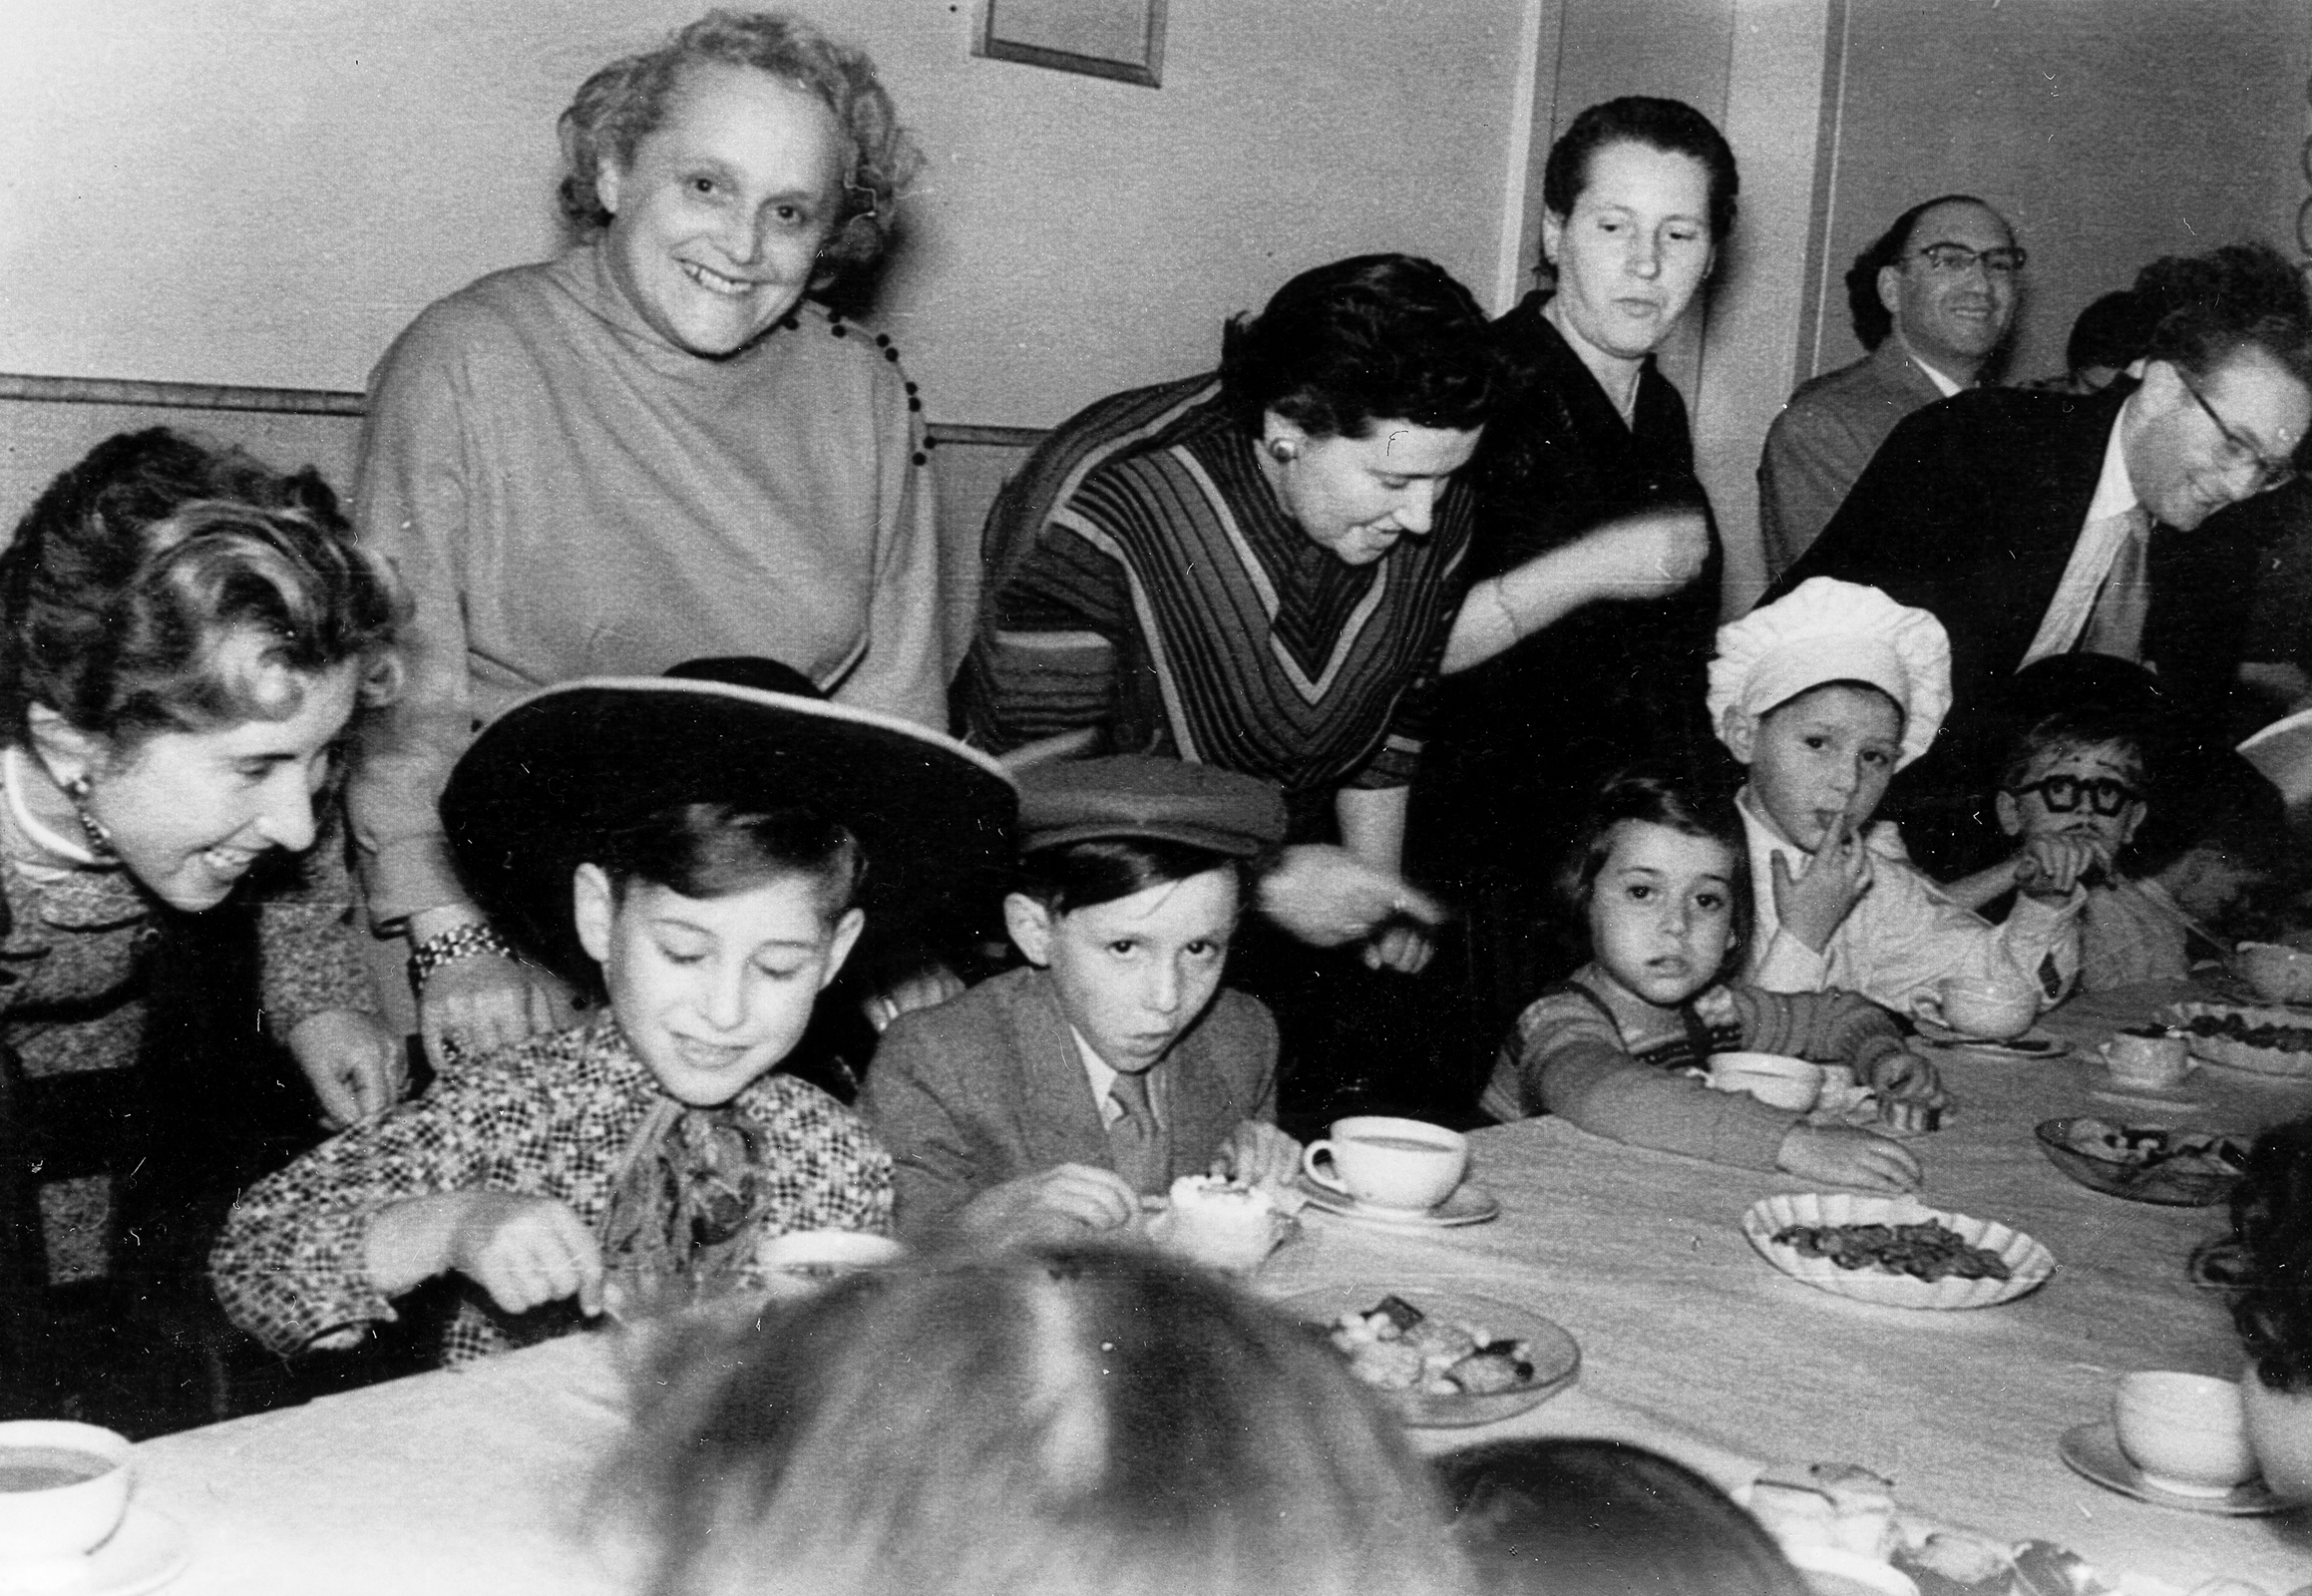 Fredy visits the Jewish community in Stuttgart with his mother on Purim